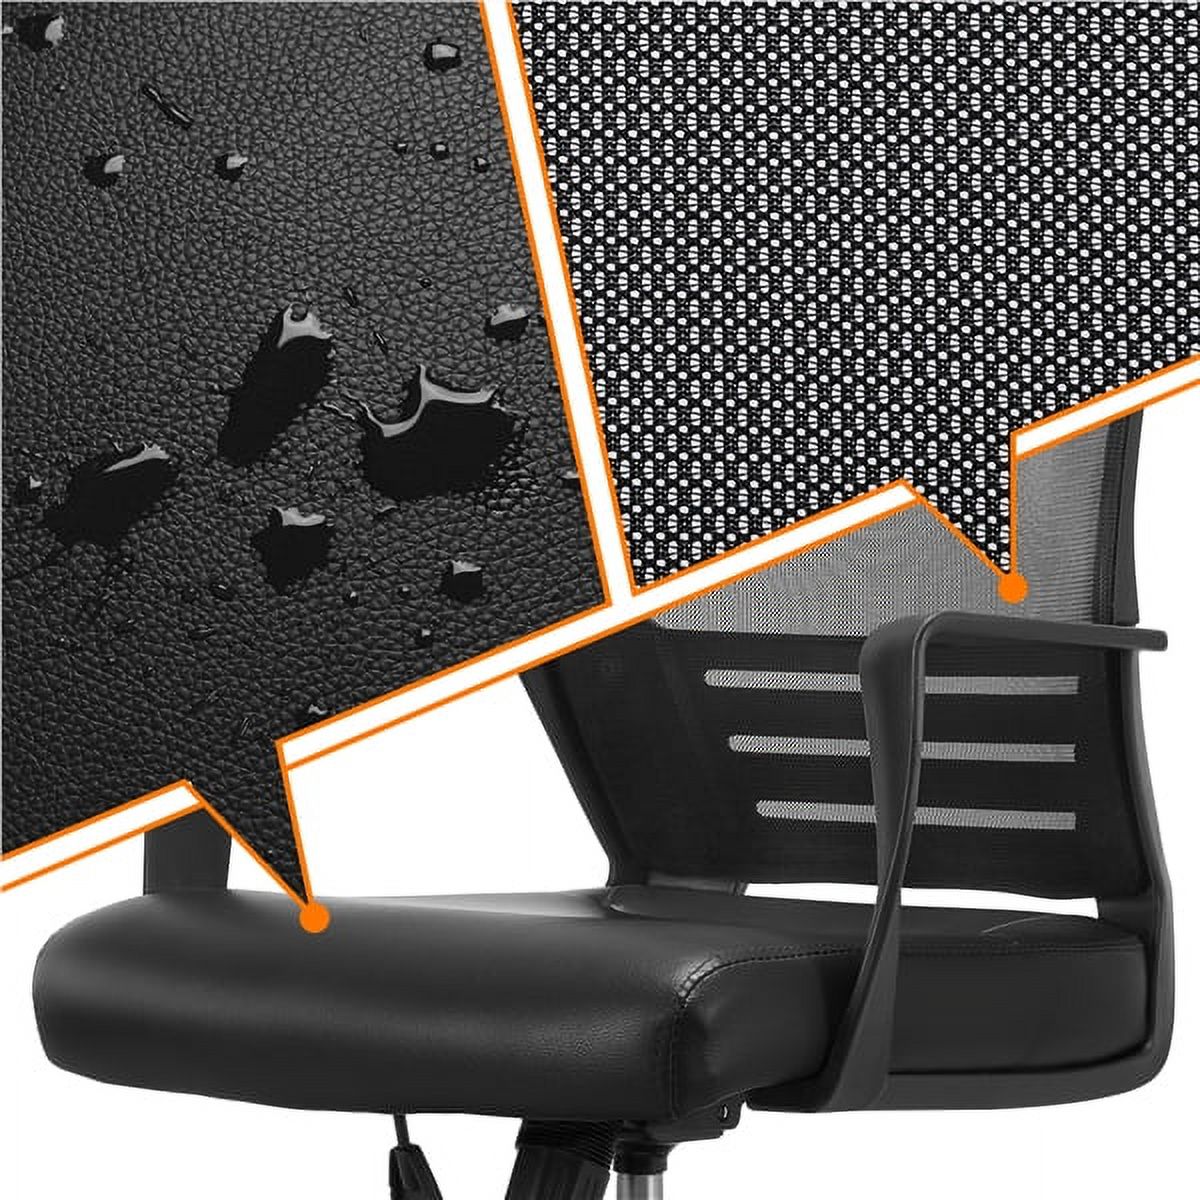 Smile Mart Adjustable Midback Ergonomic Mesh Office Chair with Lumbar Support, Black Seat - image 4 of 19